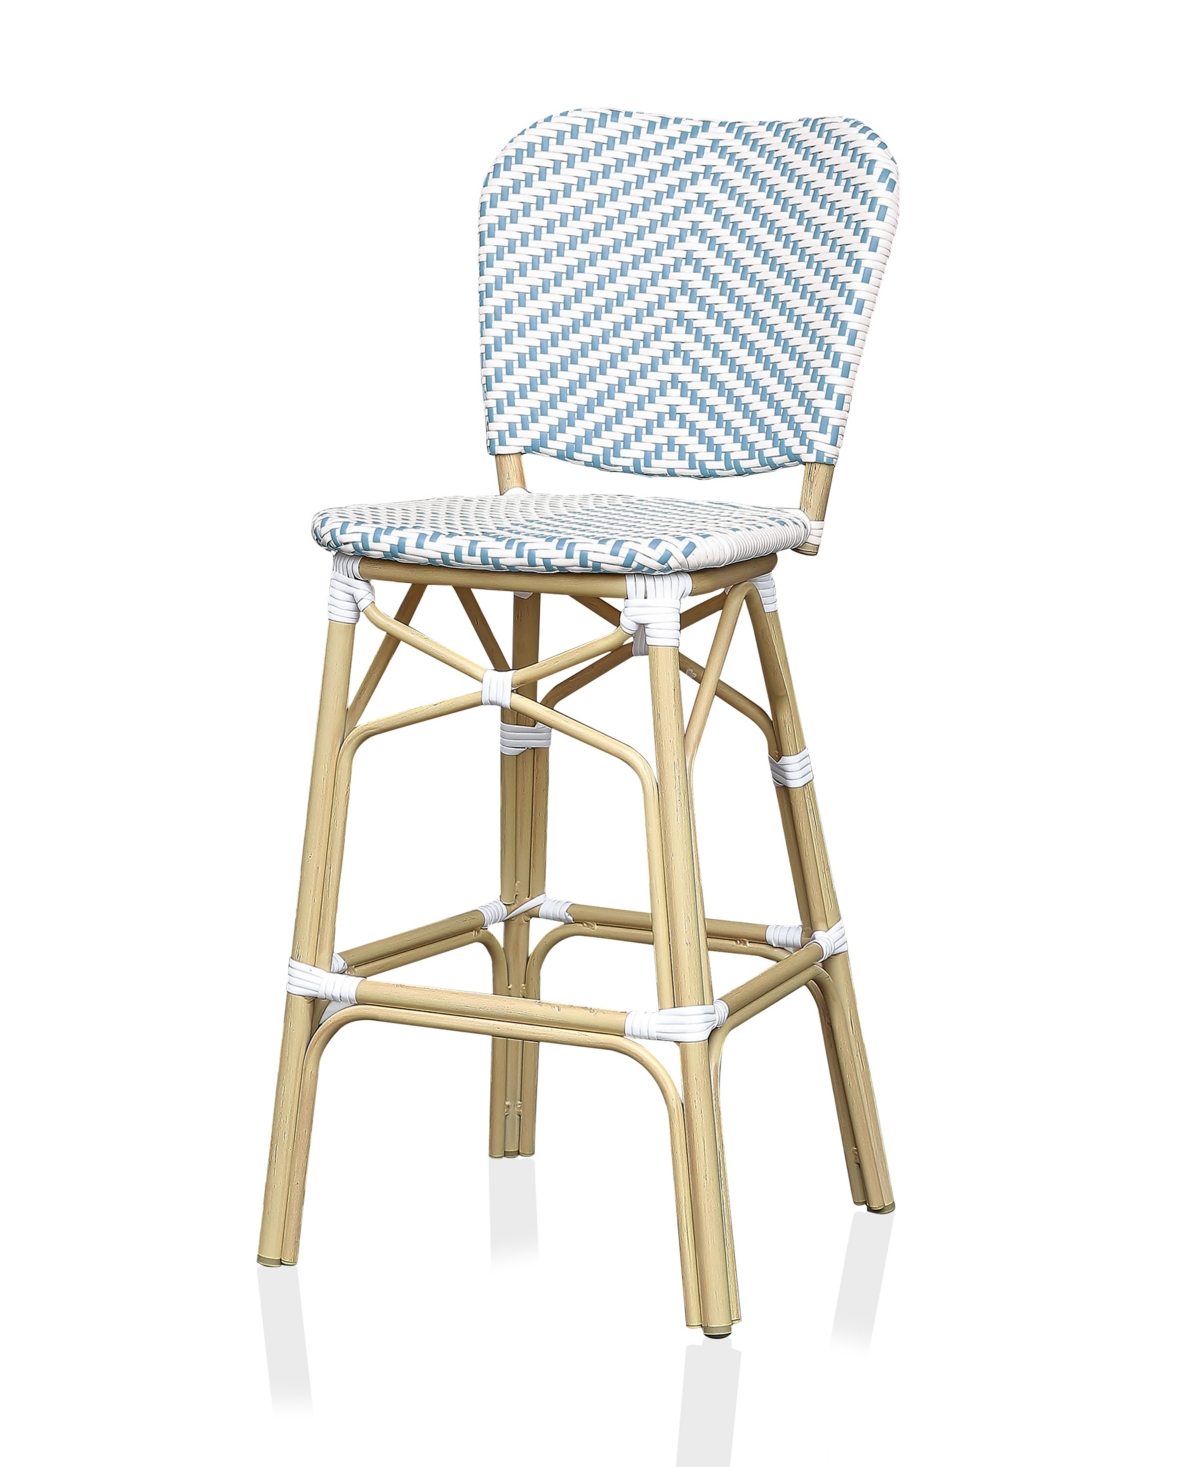 Furniture Of America Chelimo Patio Bar Chair With Footrest, Set Of 2 In Natural,blue,white